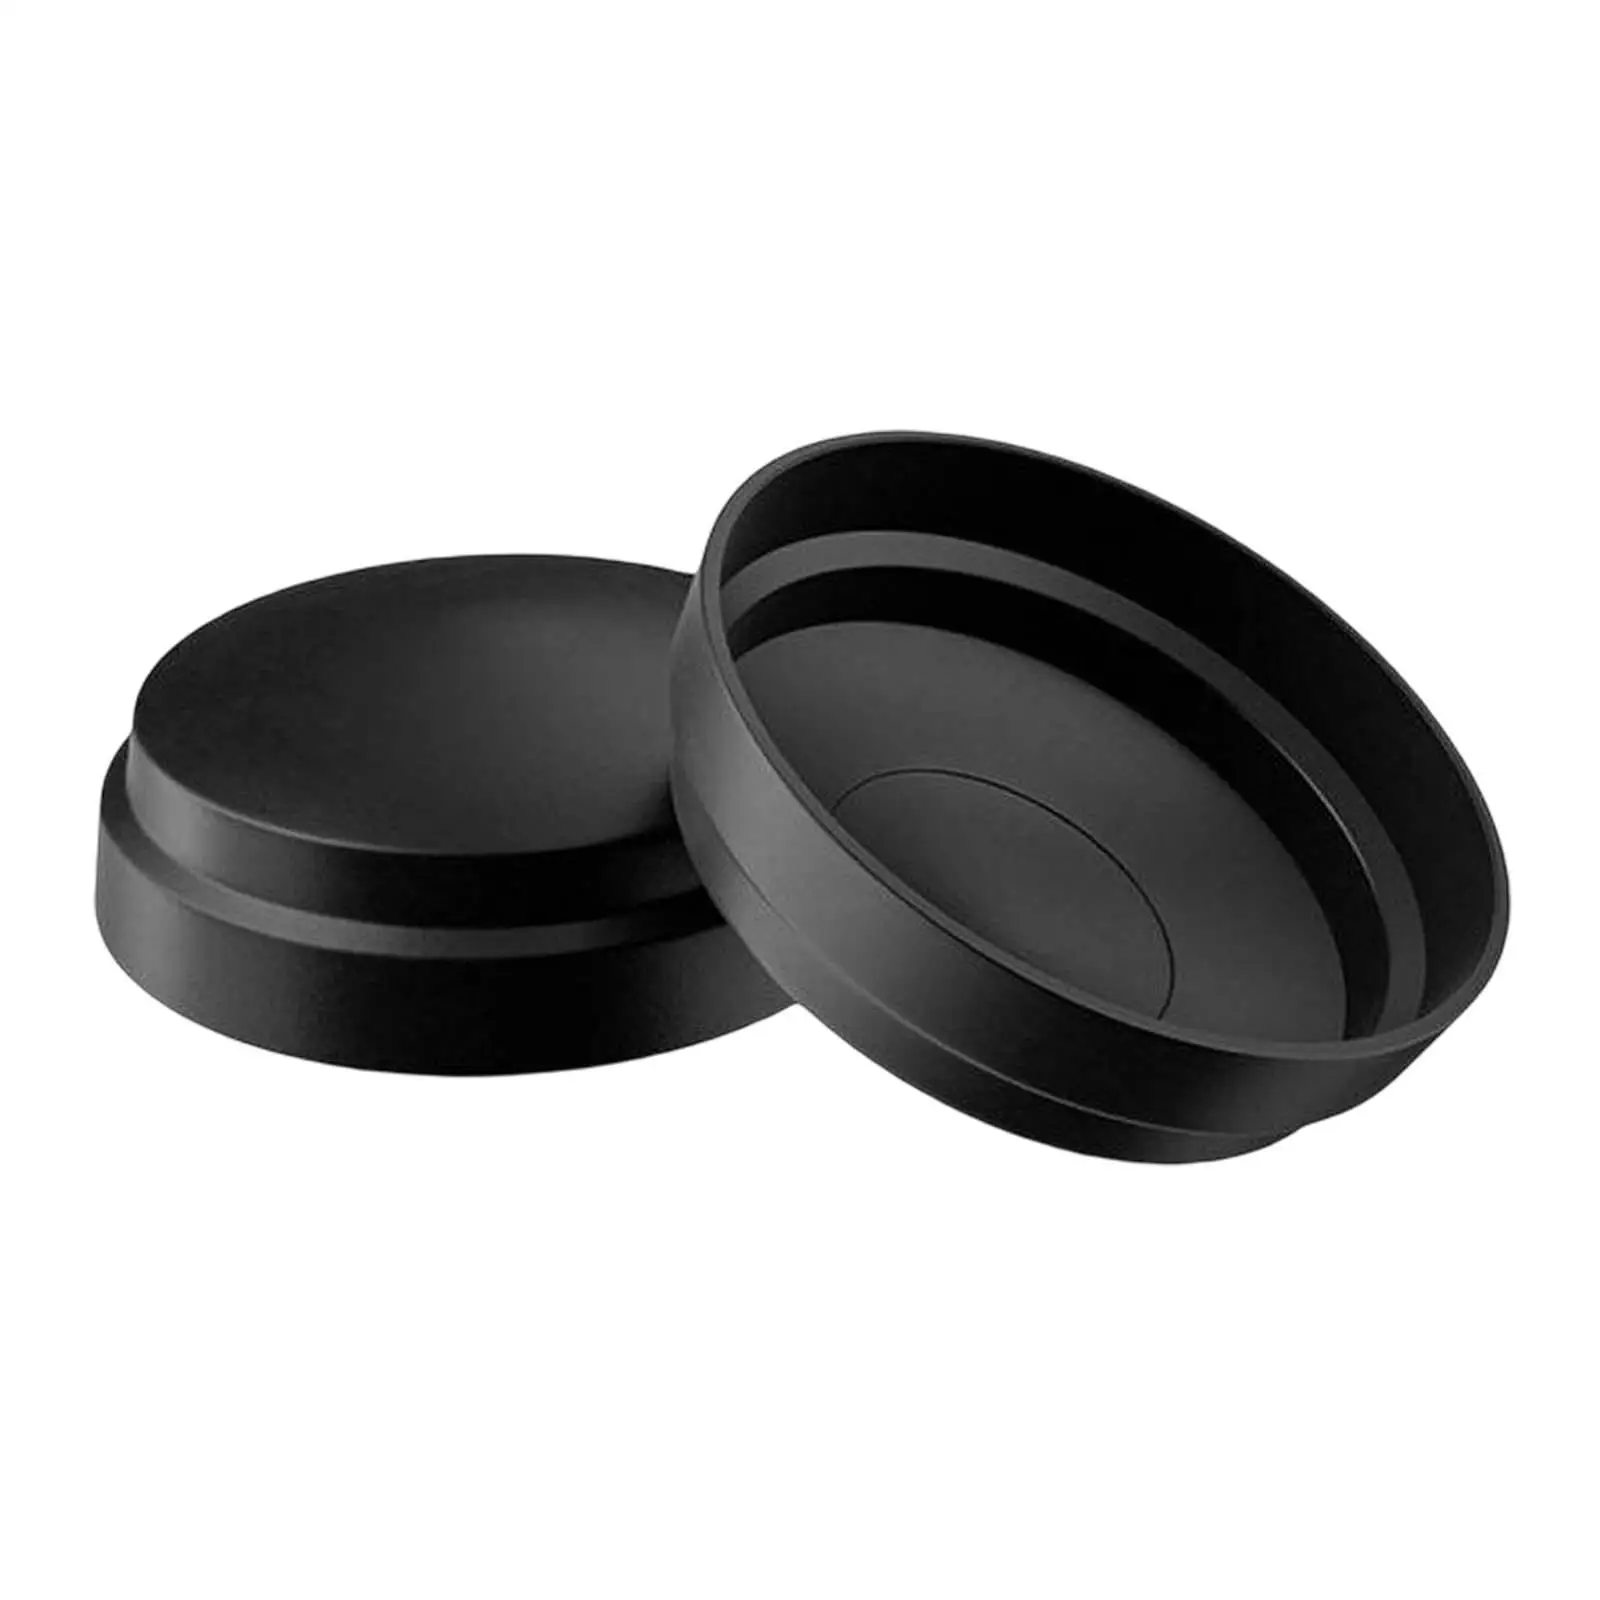 2Pieces Silicone Lens Cap Camera Accessories Anti Scratch Wear Resistant Durable Protector Cover for action Camera